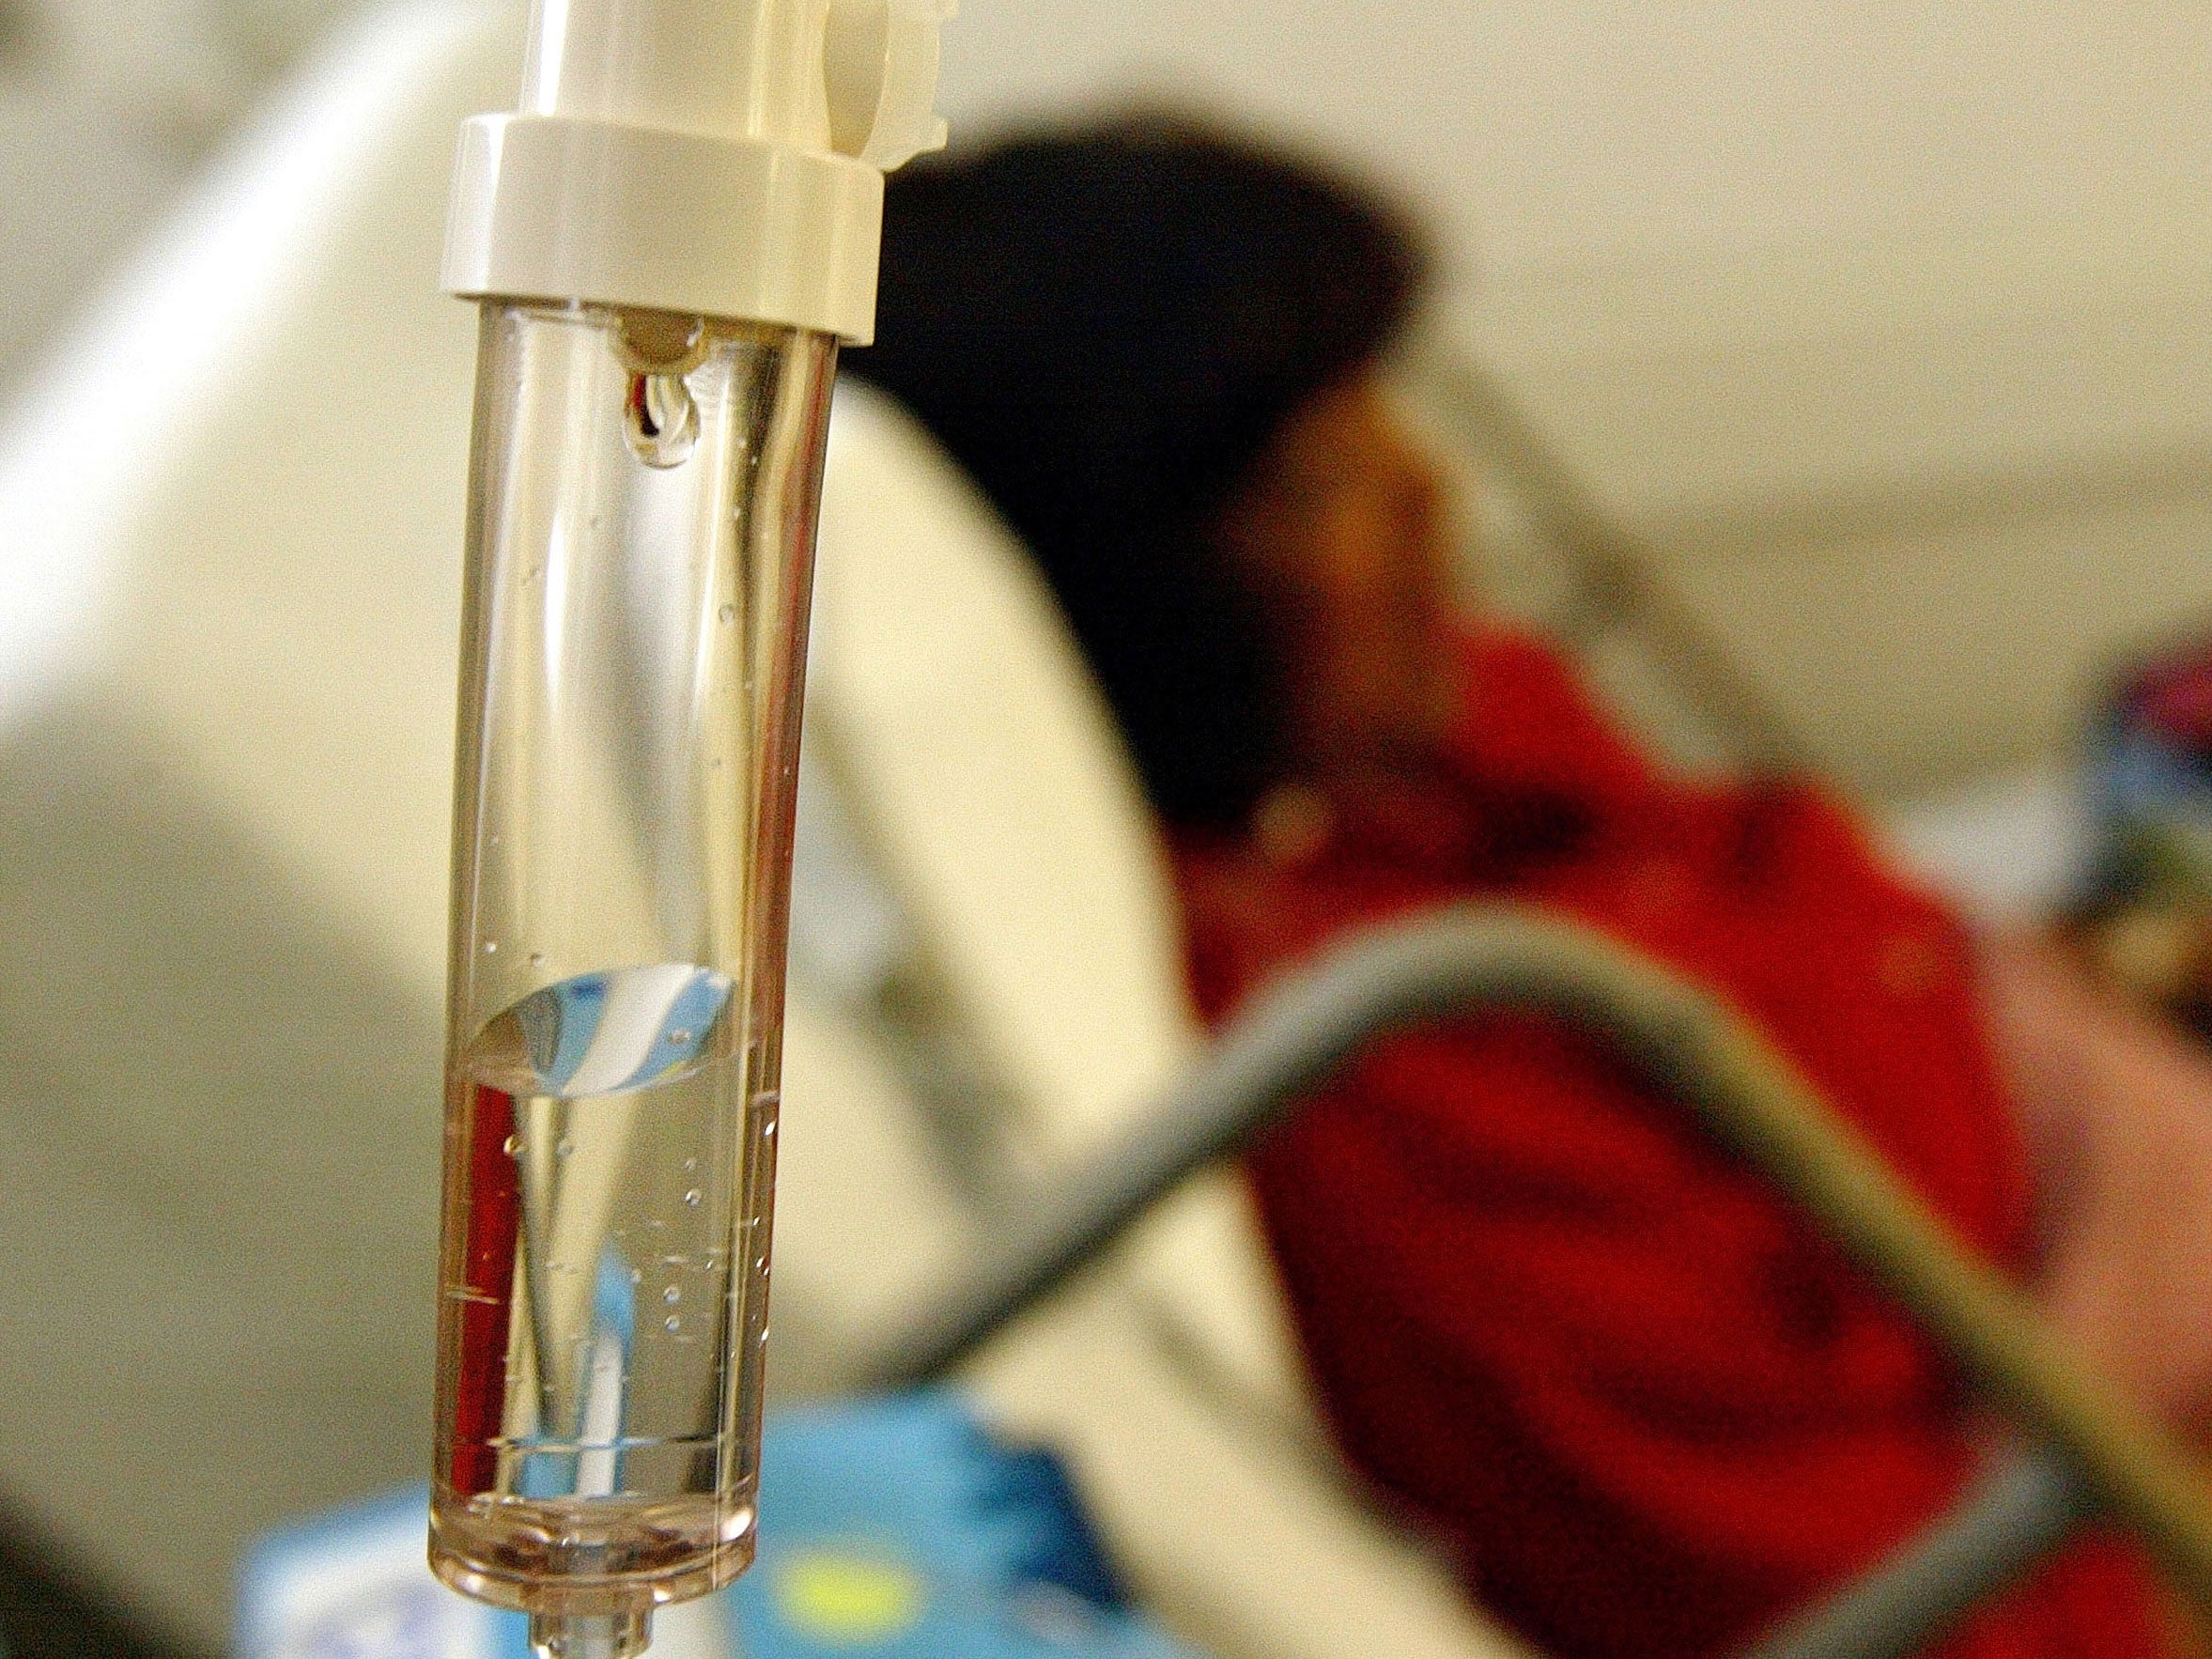 A woman receives chemotherapy treatment for cancer